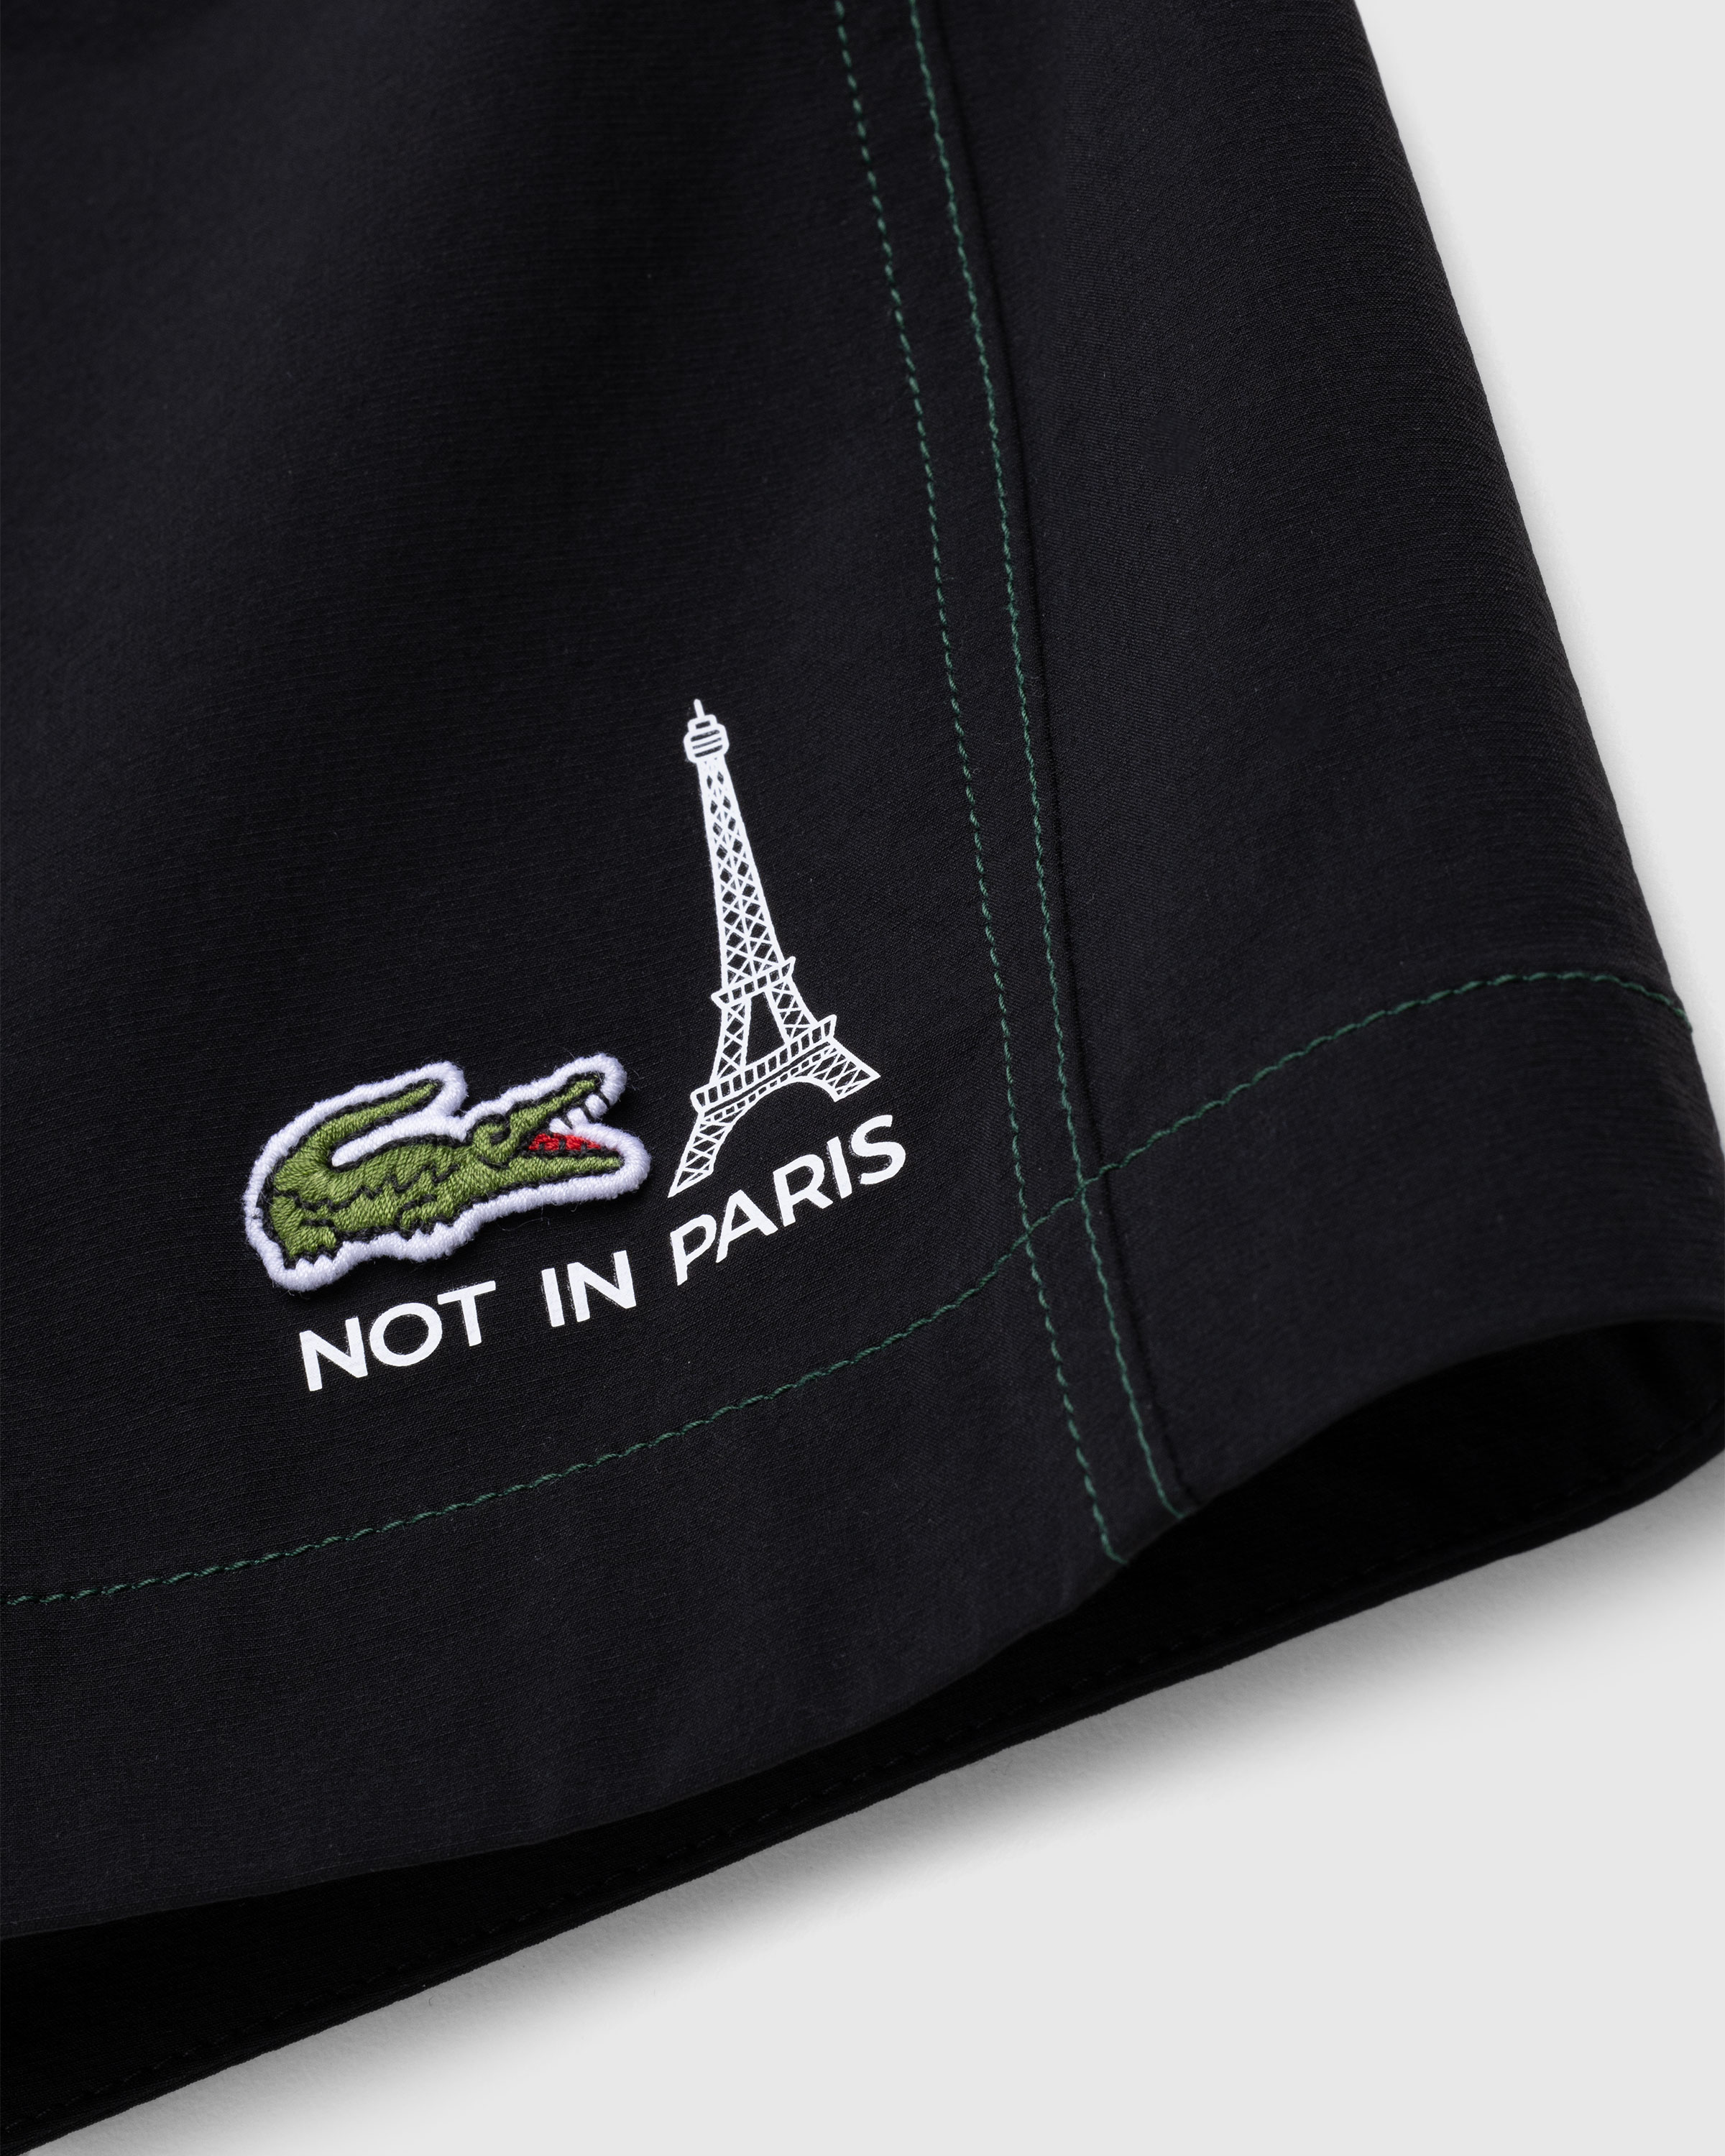 Lacoste x Highsnobiety – Not In Paris Tennis Shorts Black - Active Shorts - Sinople - Image 7